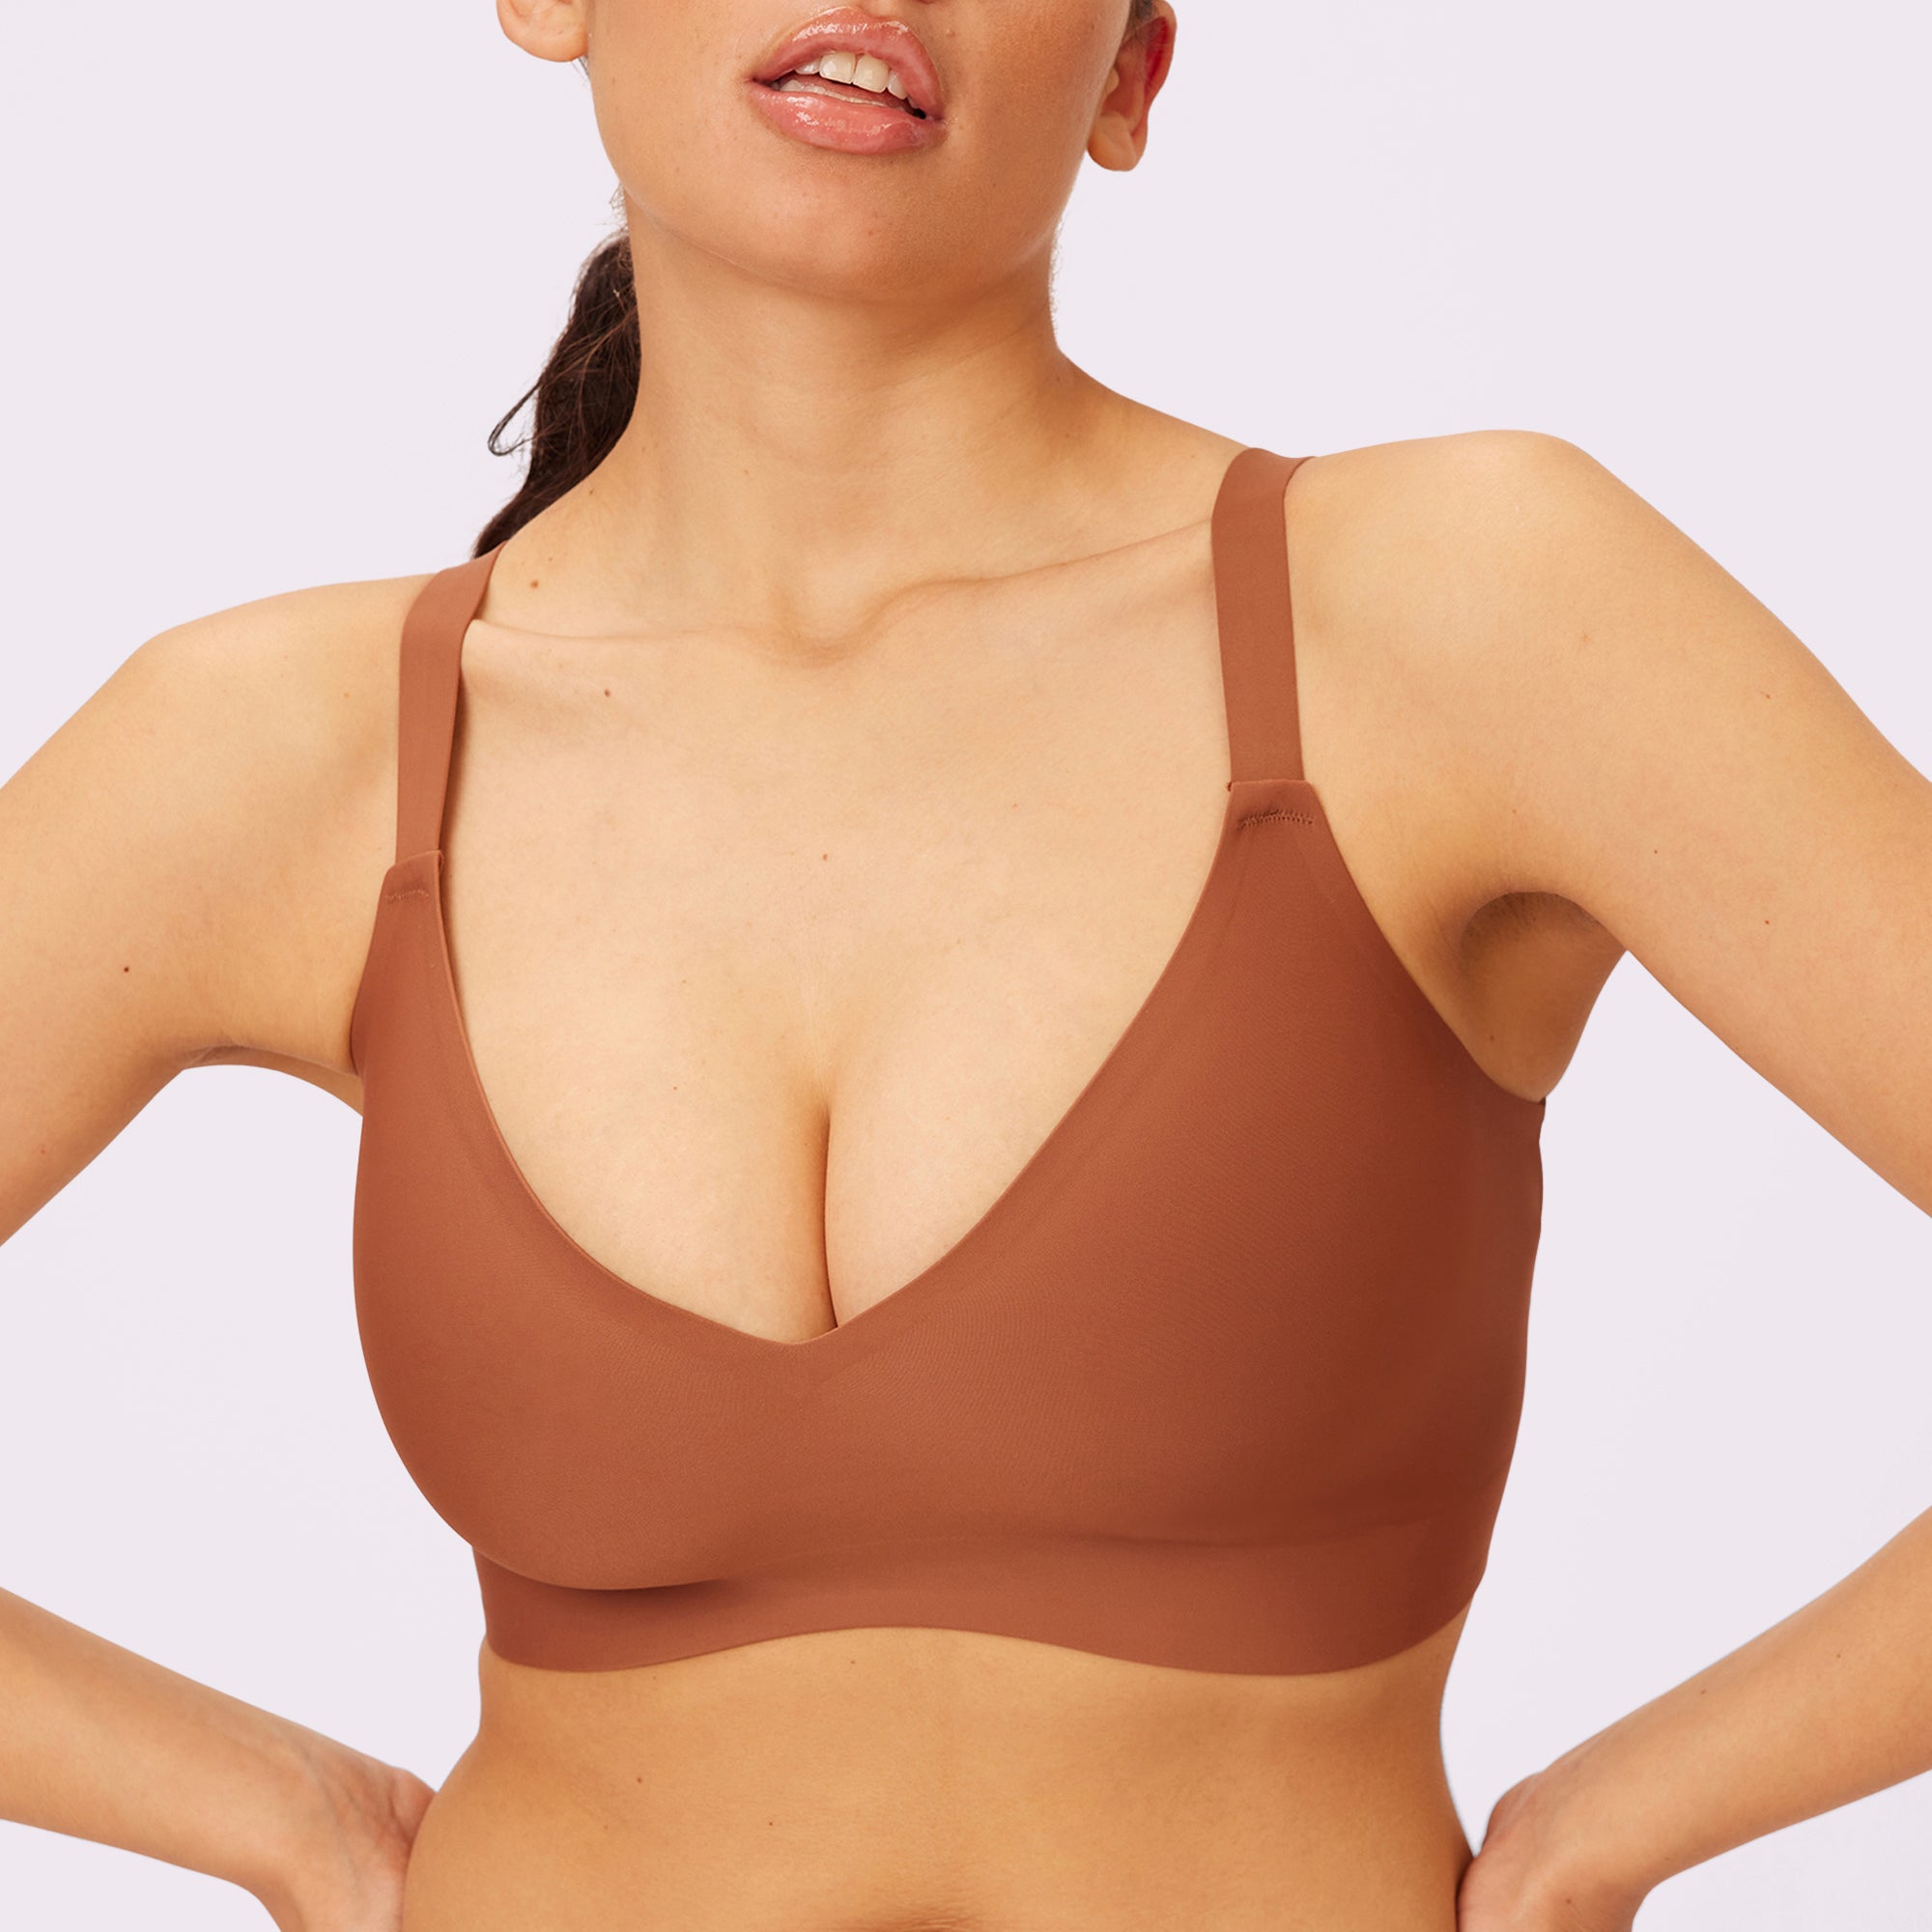 Lift and separate? A GG-cup roadtest of planet-friendly bralettes